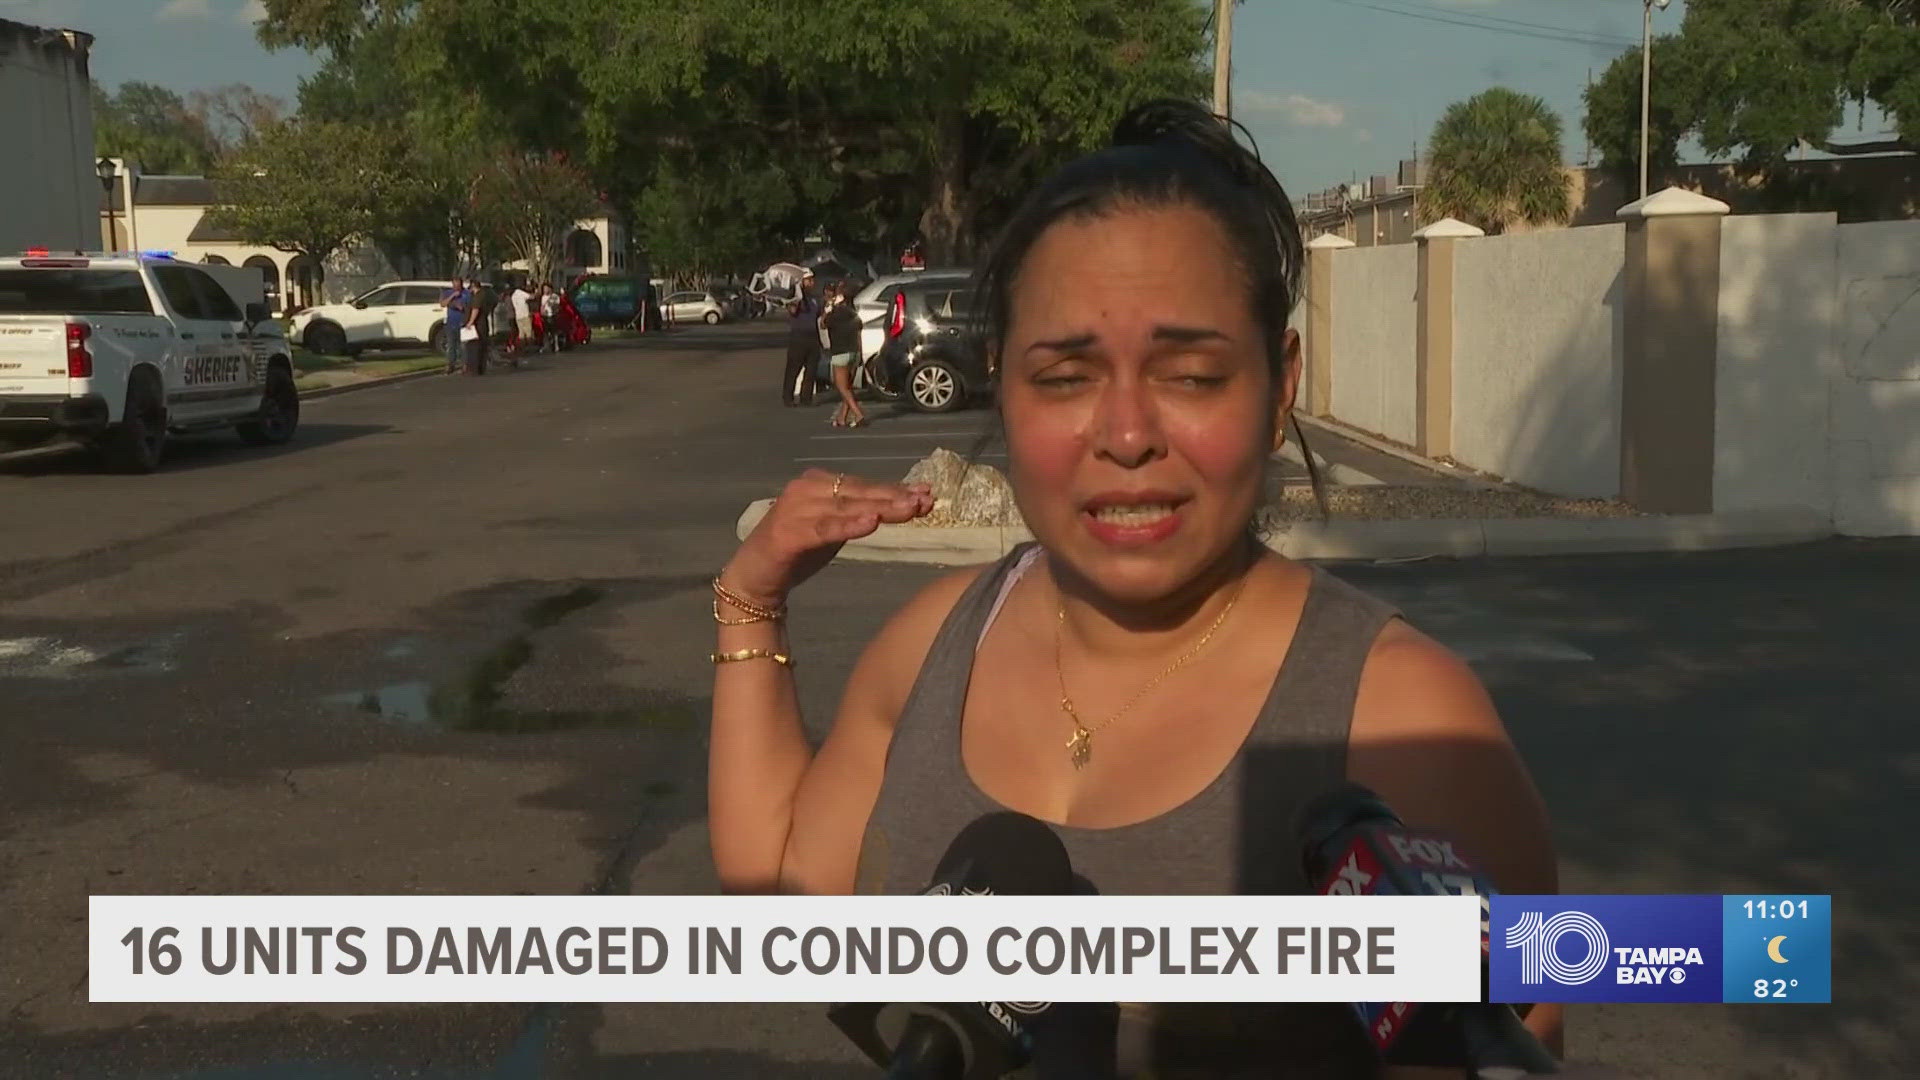 Nine roofers were working on the building when the fire broke out, according to Hillsborough County Fire Rescue.